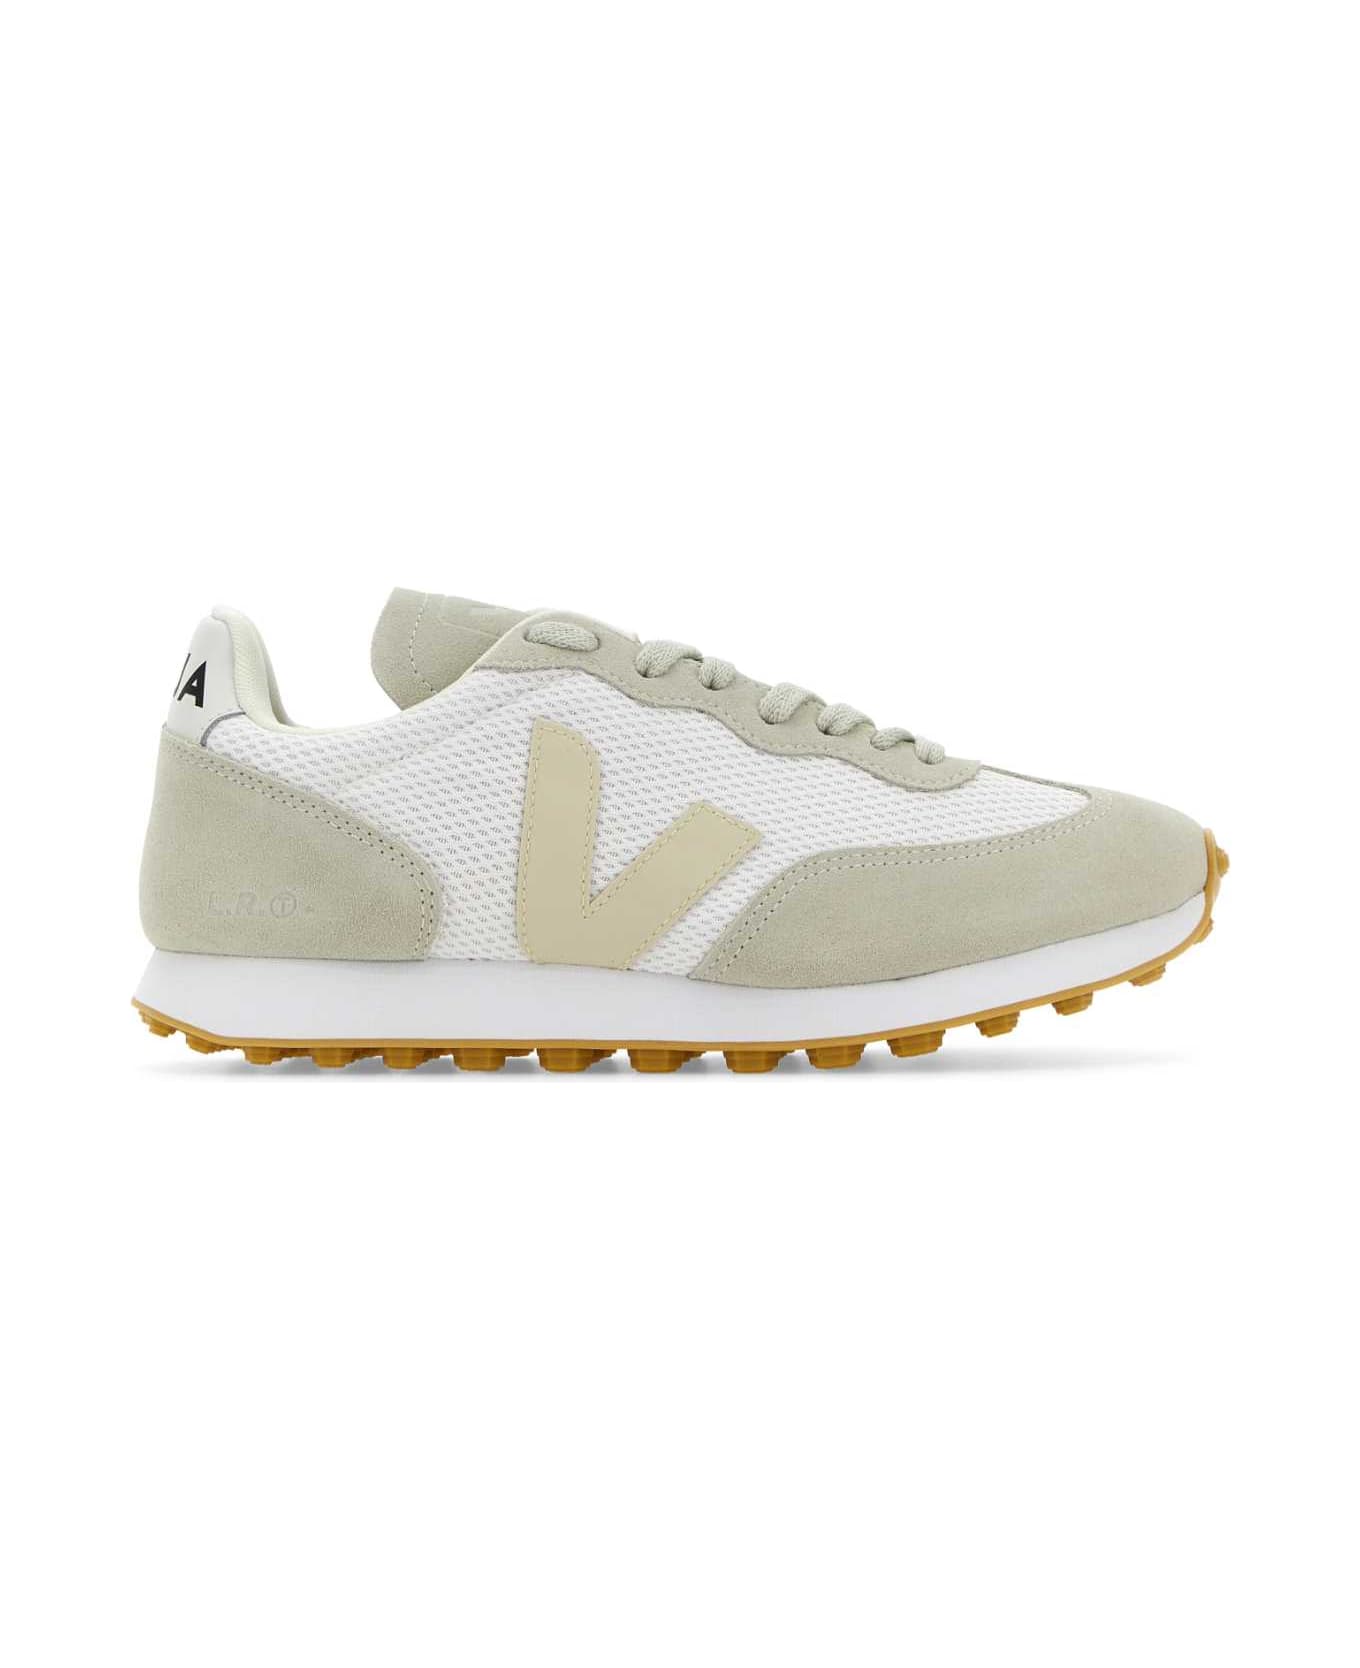 Veja Two-tones Polyester And Suede Rio Branco Sneakers - WHITEPIERRENATURAL スニーカー